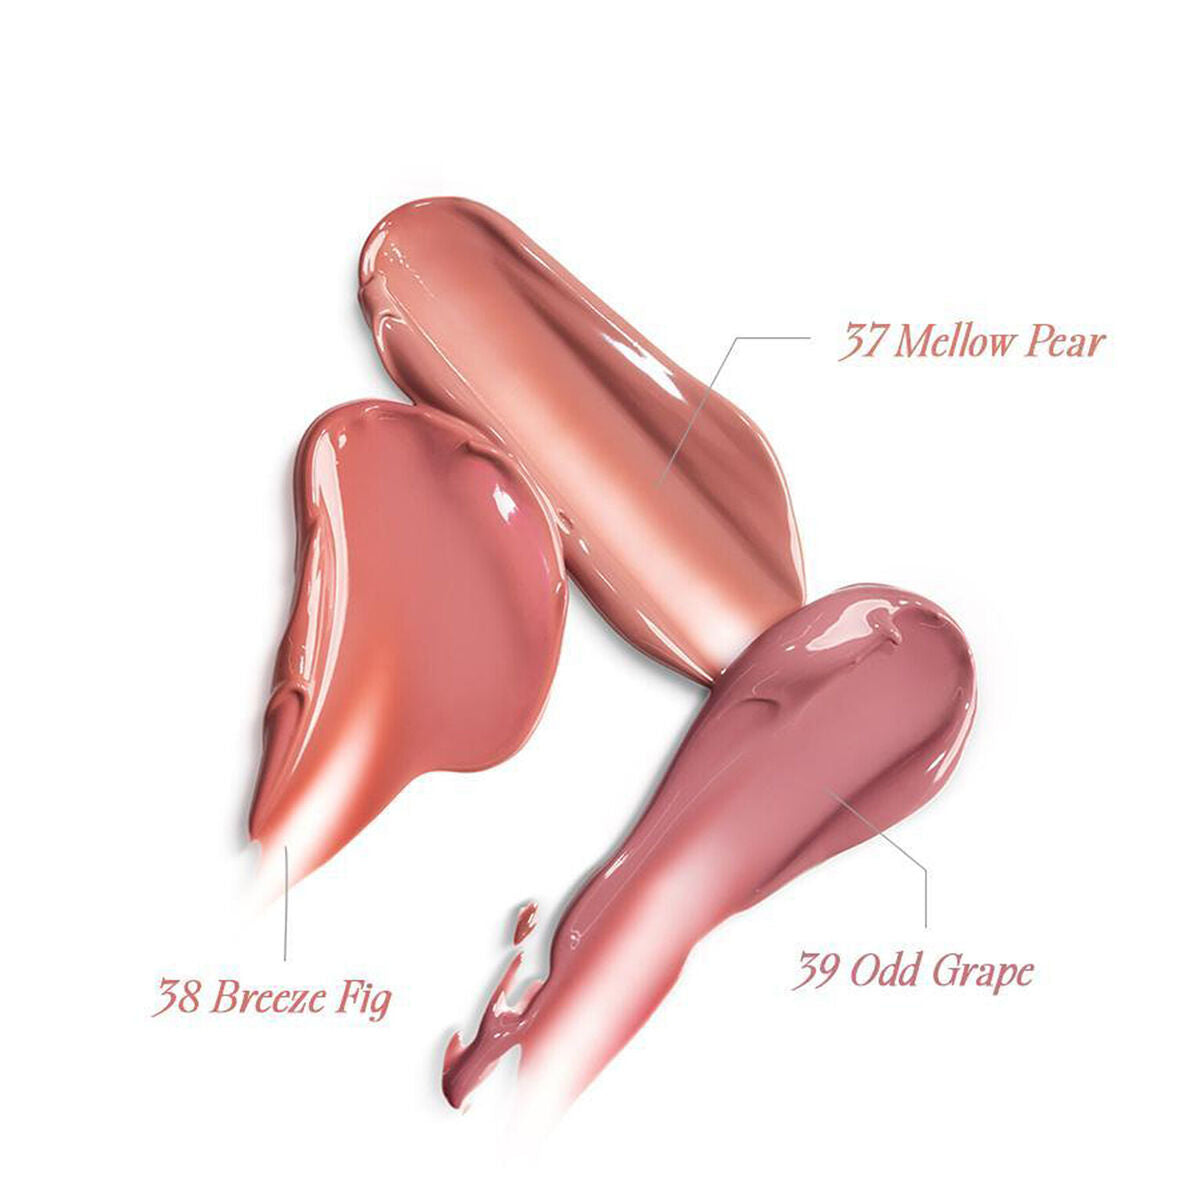 Juicy Lasting Tint Spring Fever - 3 Colors